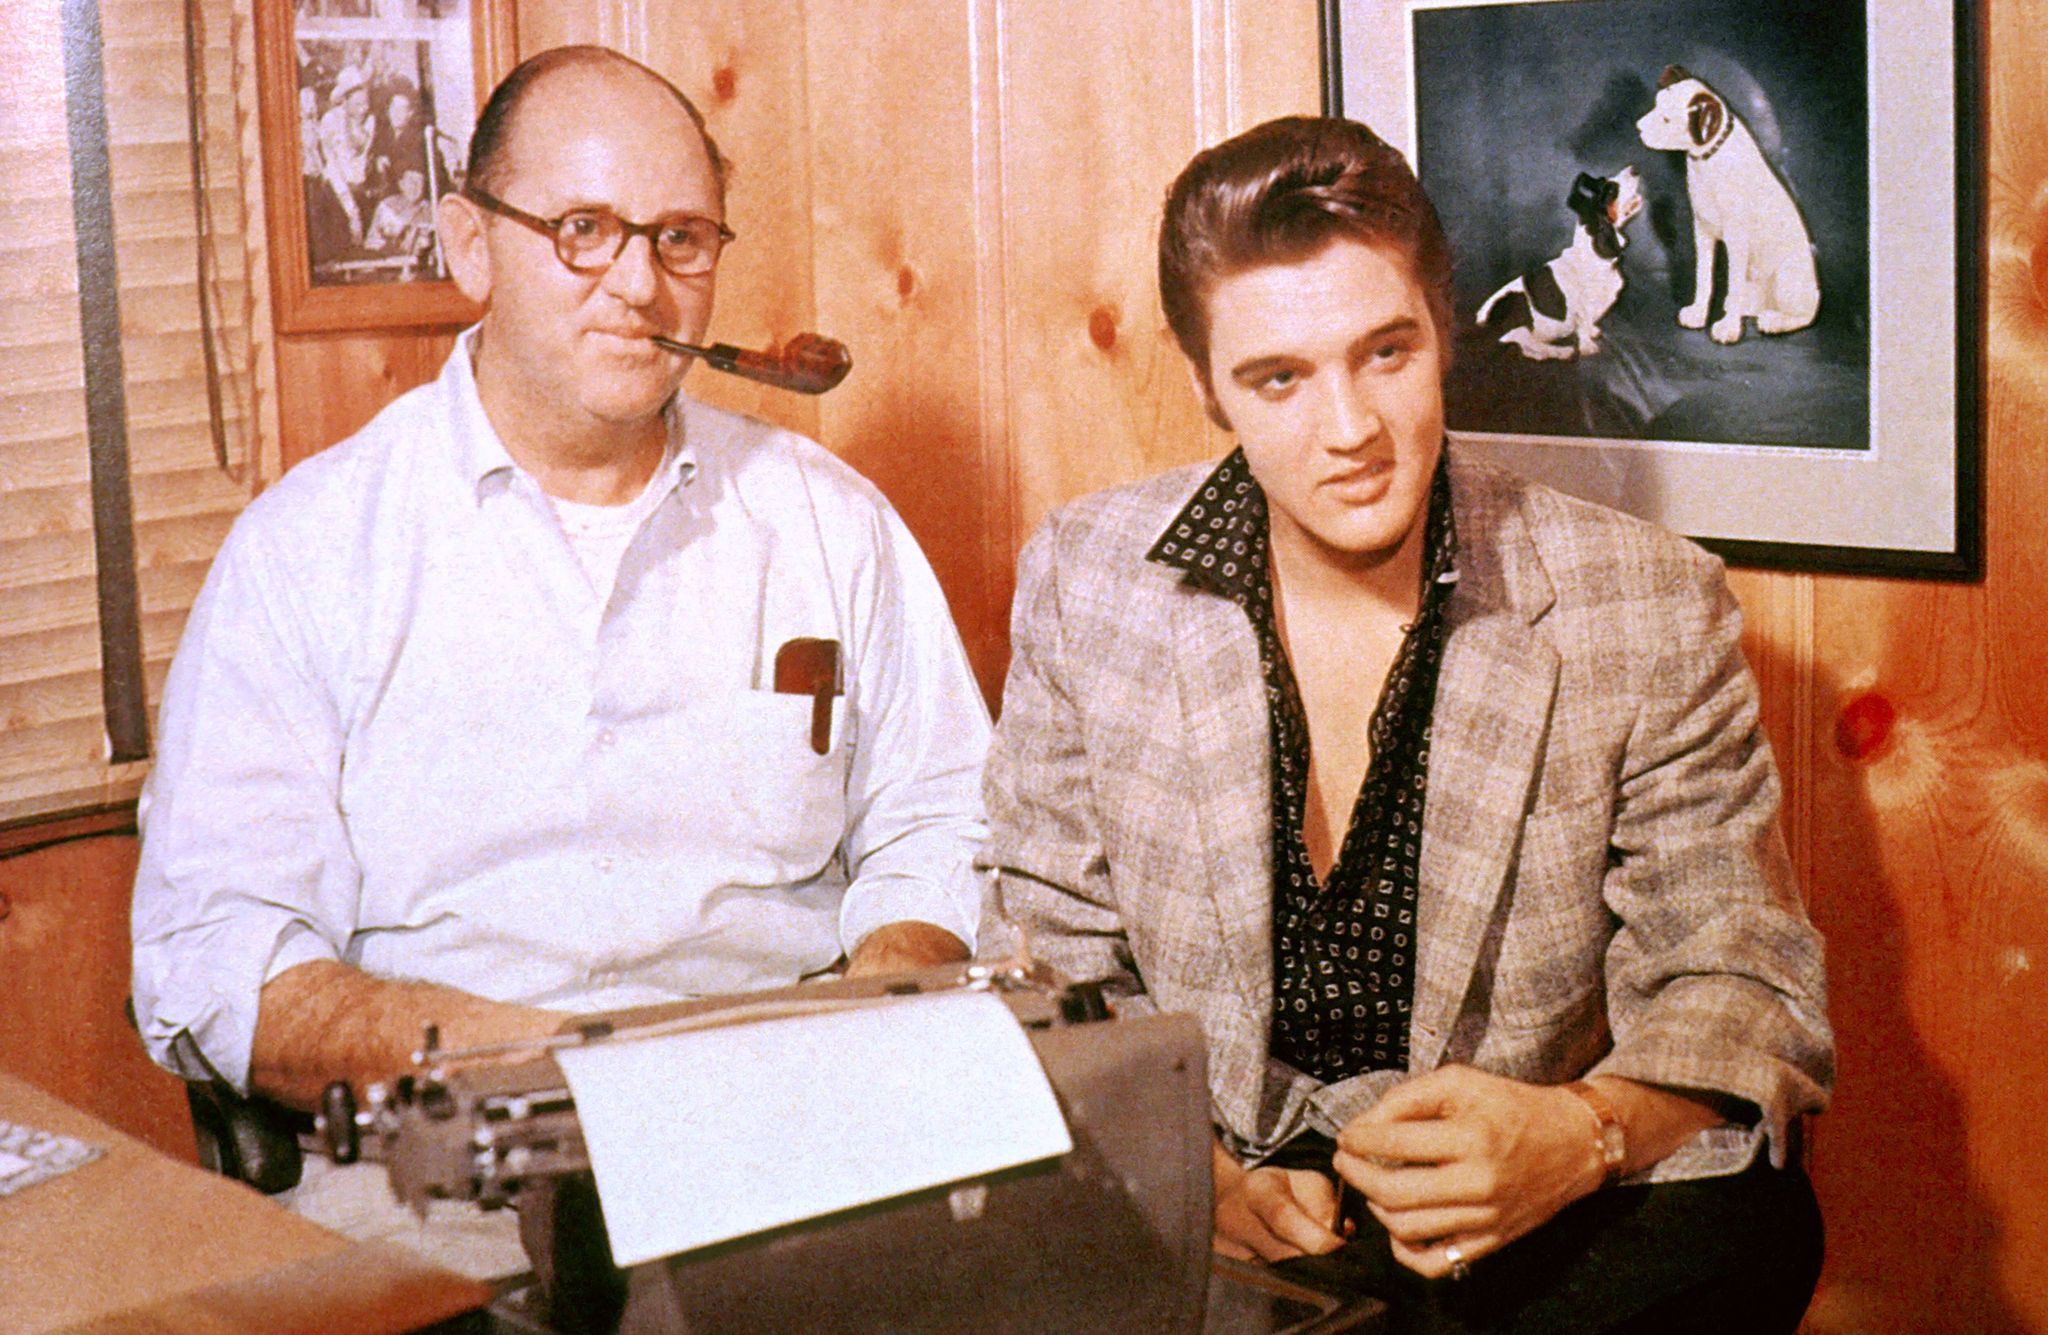 united states   january 01  australia out usa  photo of colonel tom parker and elvis presley, with manager colonel tom parker   posed, c19561967  photo by gab archiveredferns